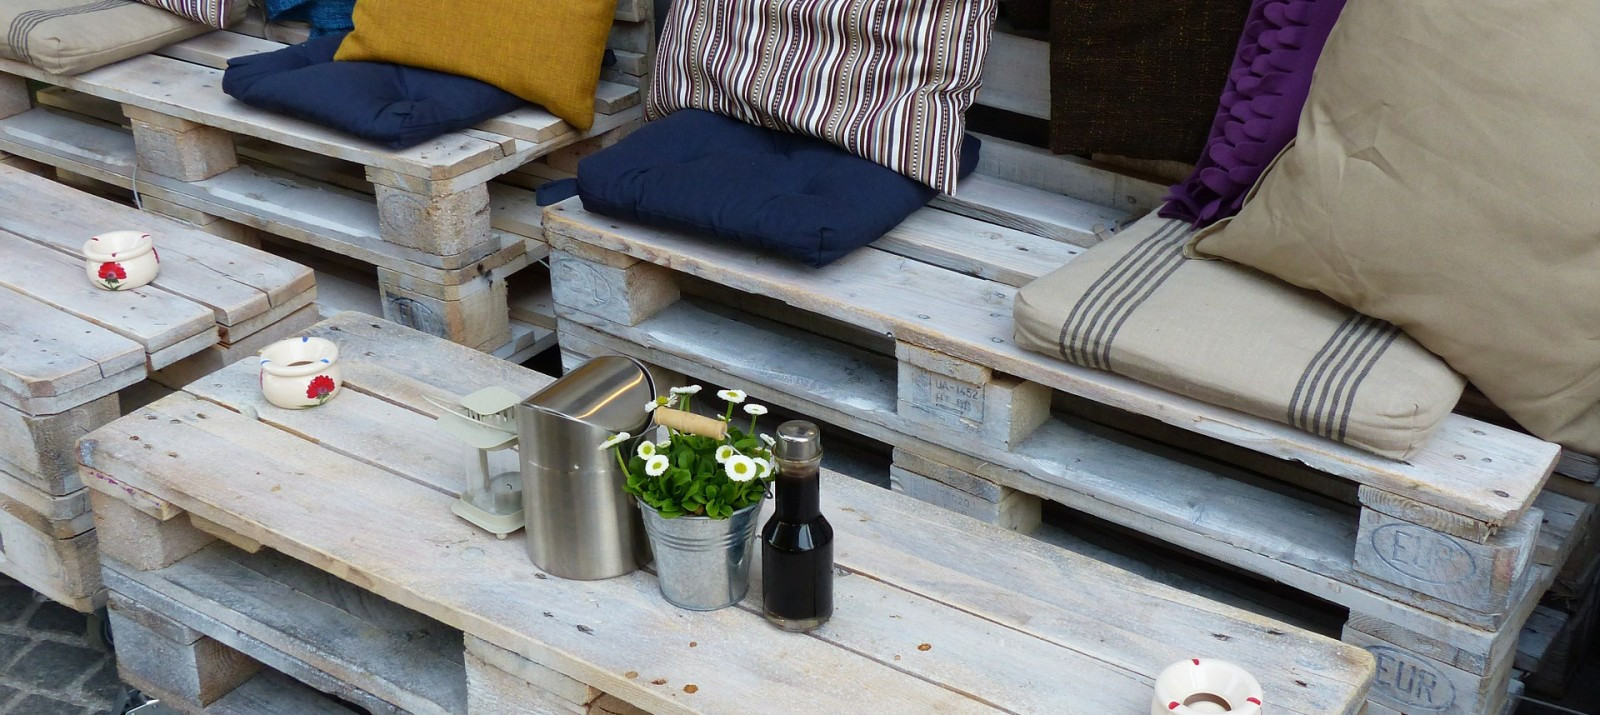 Wood Pallets Furniture DIY
 11 DIY Wood Pallet Ideas To Make Space In Your Apartment